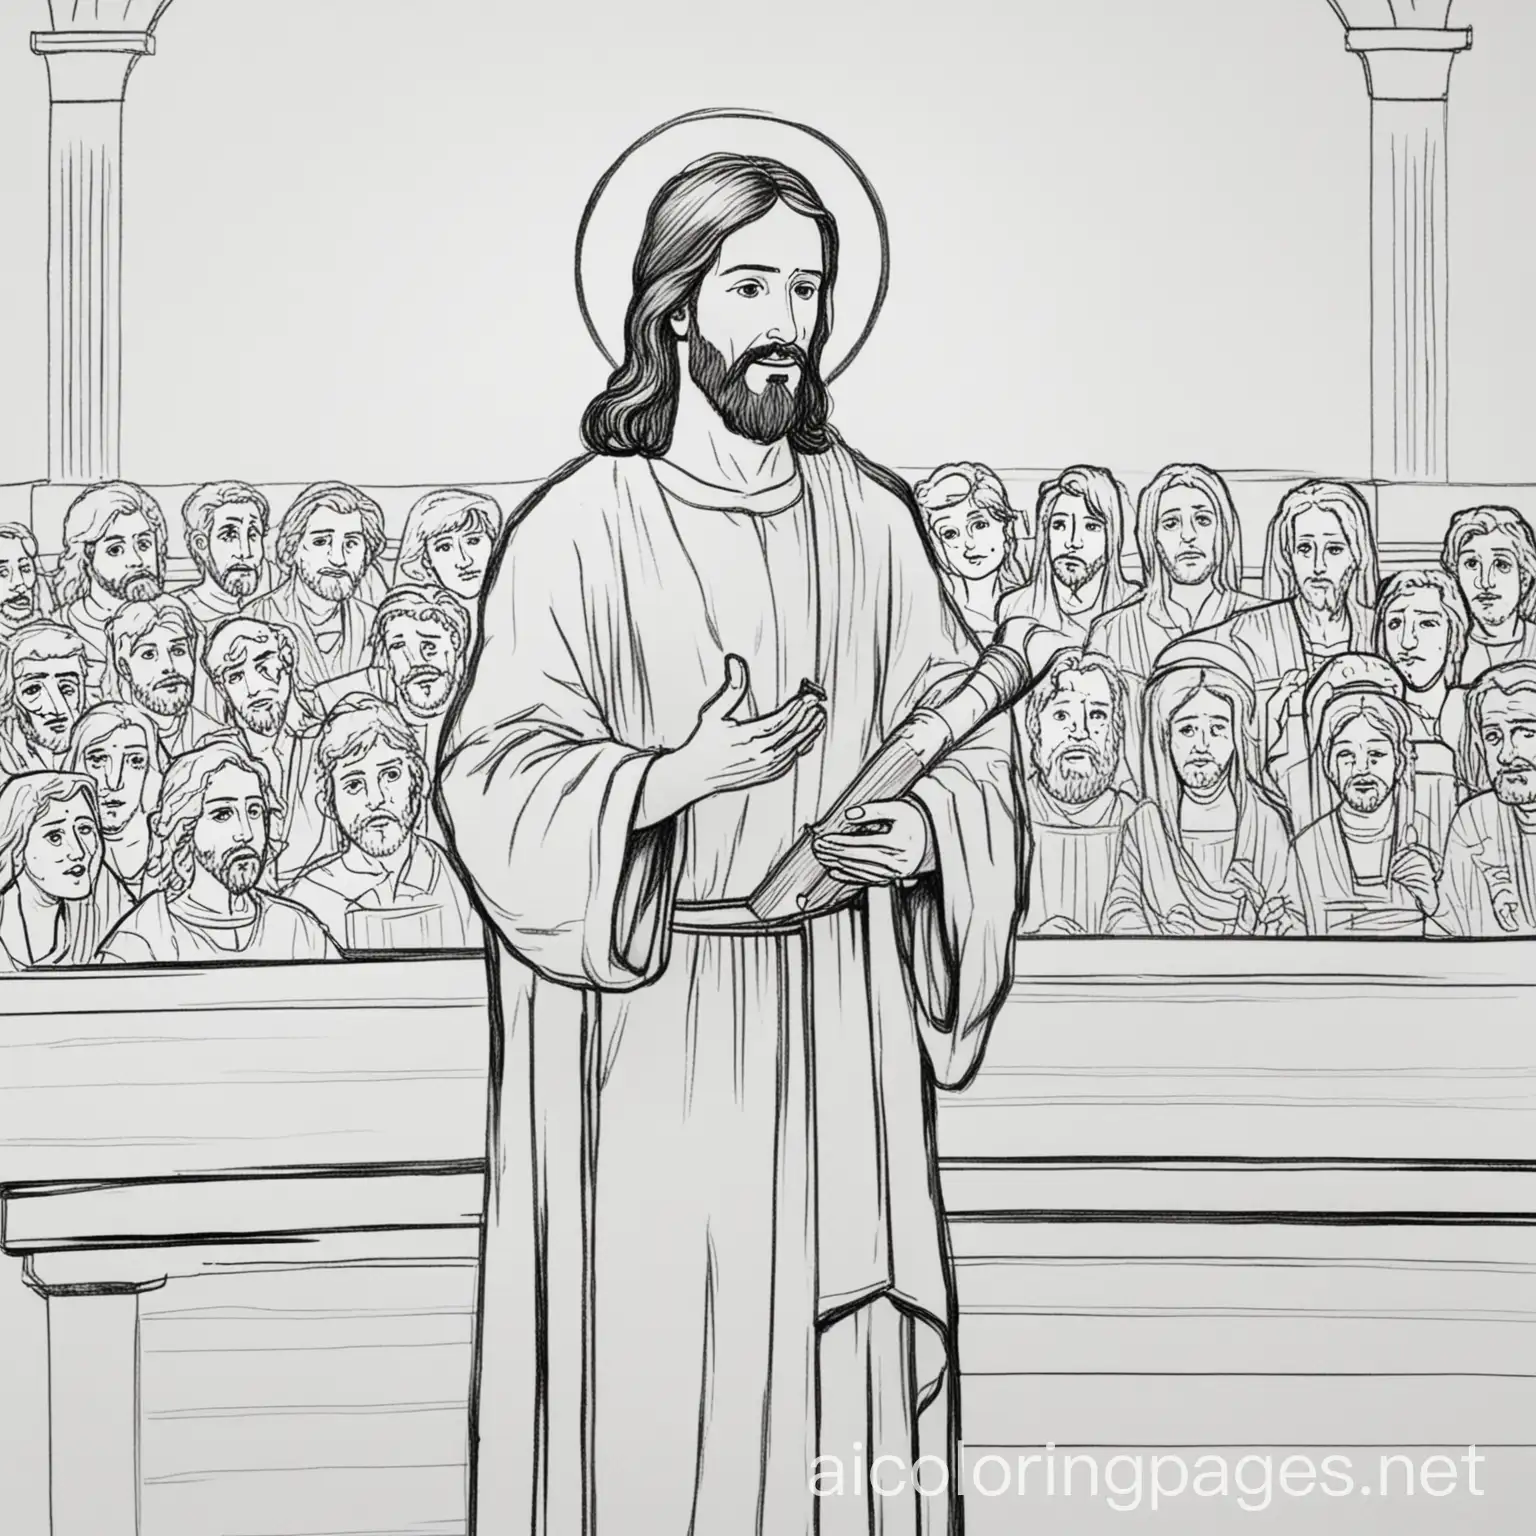 Jesus testifies , Coloring Page, black and white, line art, white background, Simplicity, Ample White Space. The background of the coloring page is plain white to make it easy for young children to color within the lines. The outlines of all the subjects are easy to distinguish, making it simple for kids to color without too much difficulty